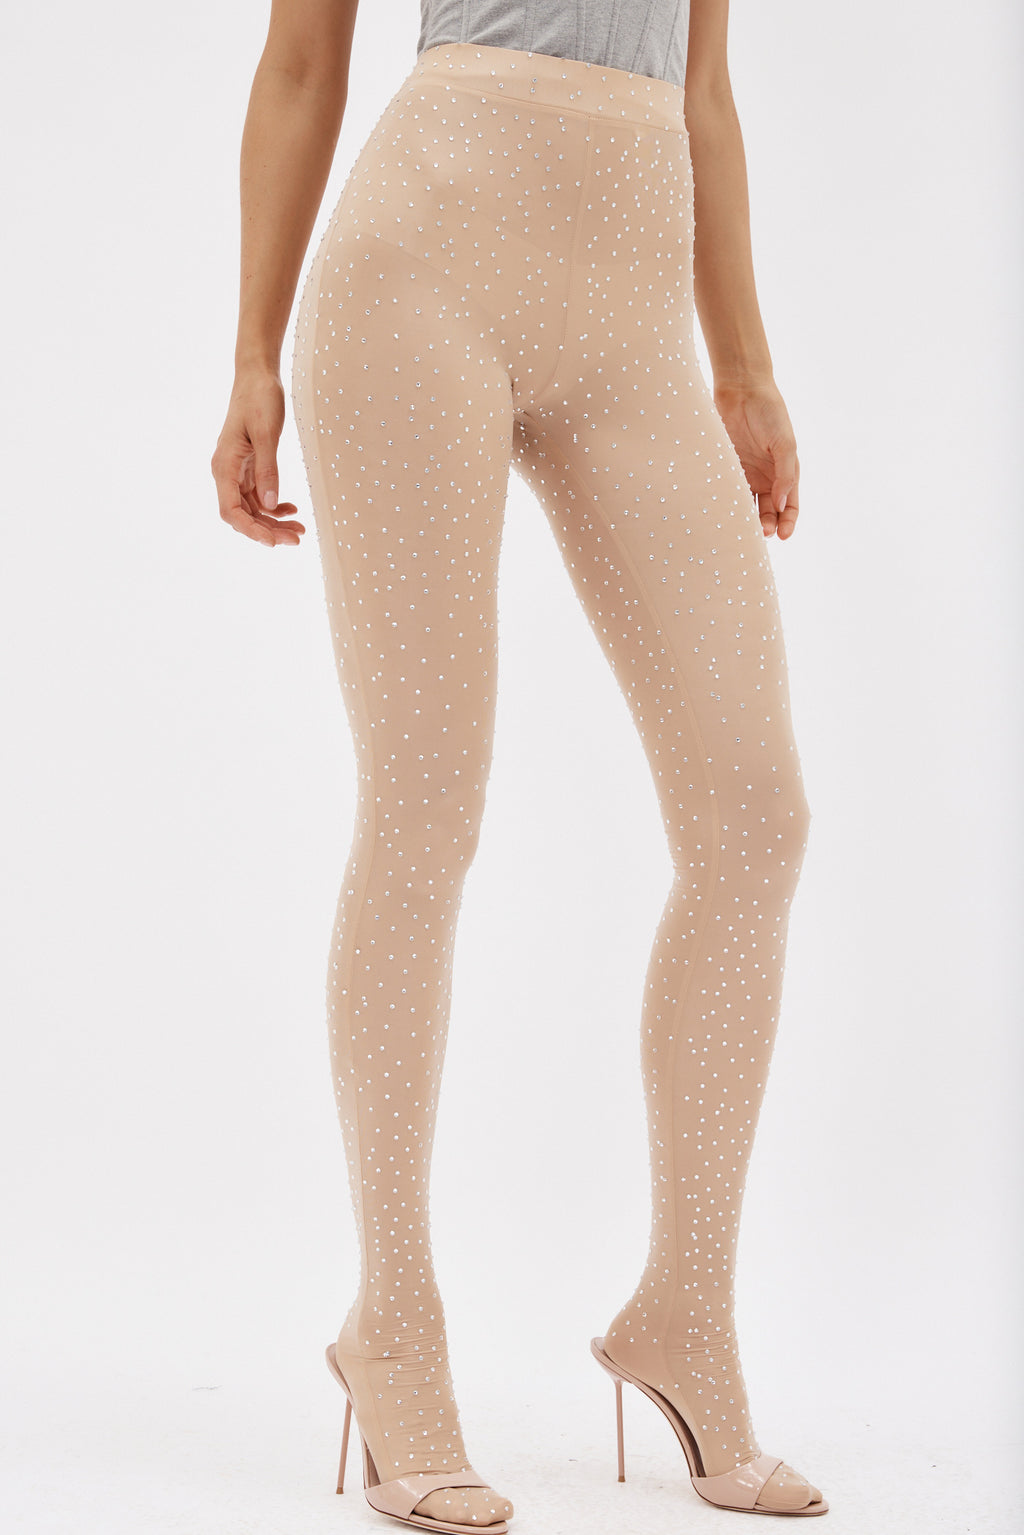 ALEX PERRY Rane crystal-embellished stretch-jersey tights